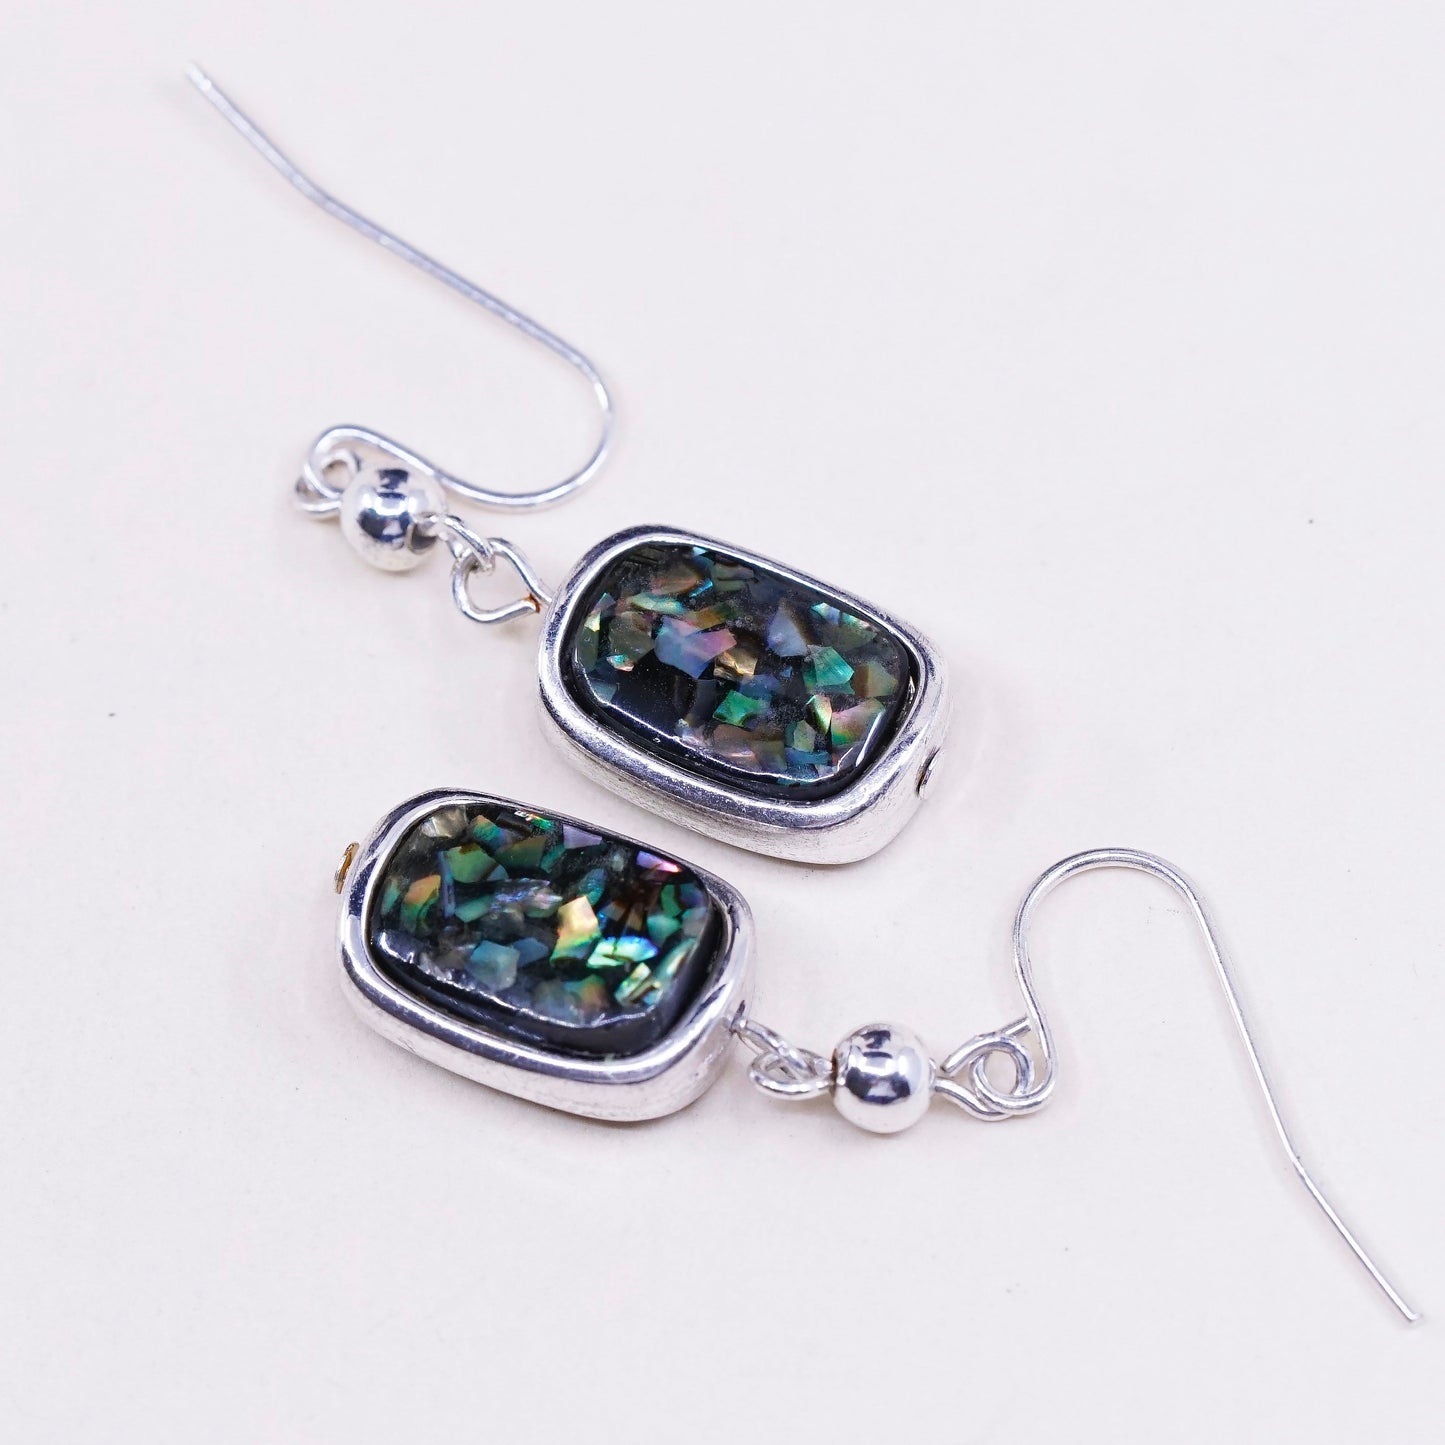 Vintage sterling silver handmade oval earrings, Mexico 925 with abalone